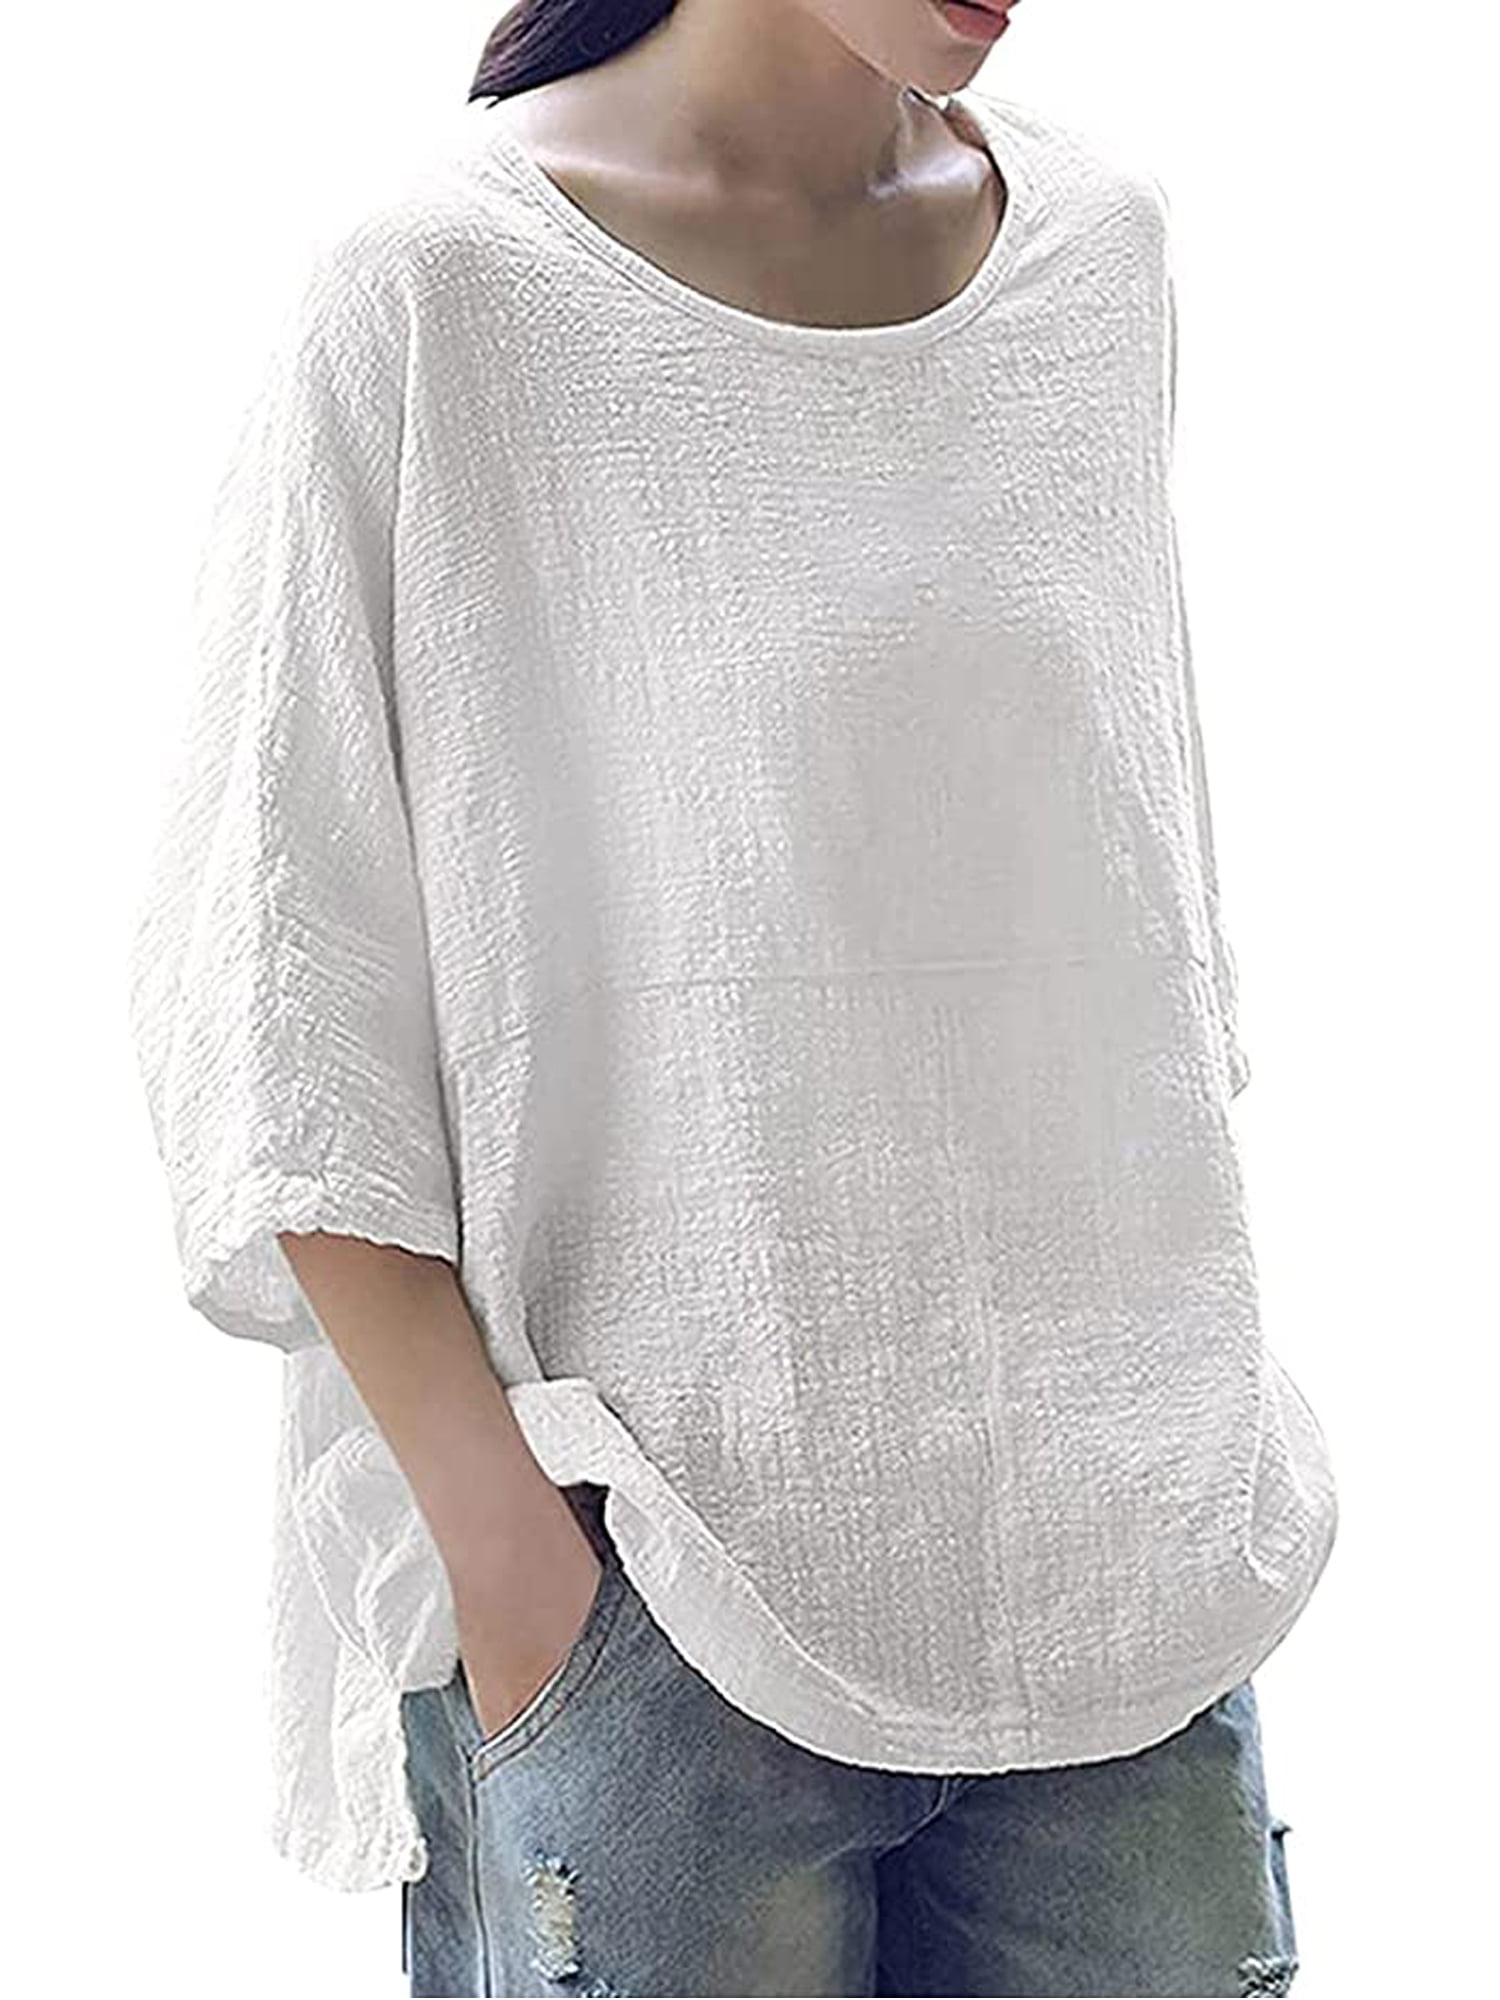 Plus Size Womens Cotton Linen Tee Summer Casual Loose Tunic Blouse Tops T-Shirt